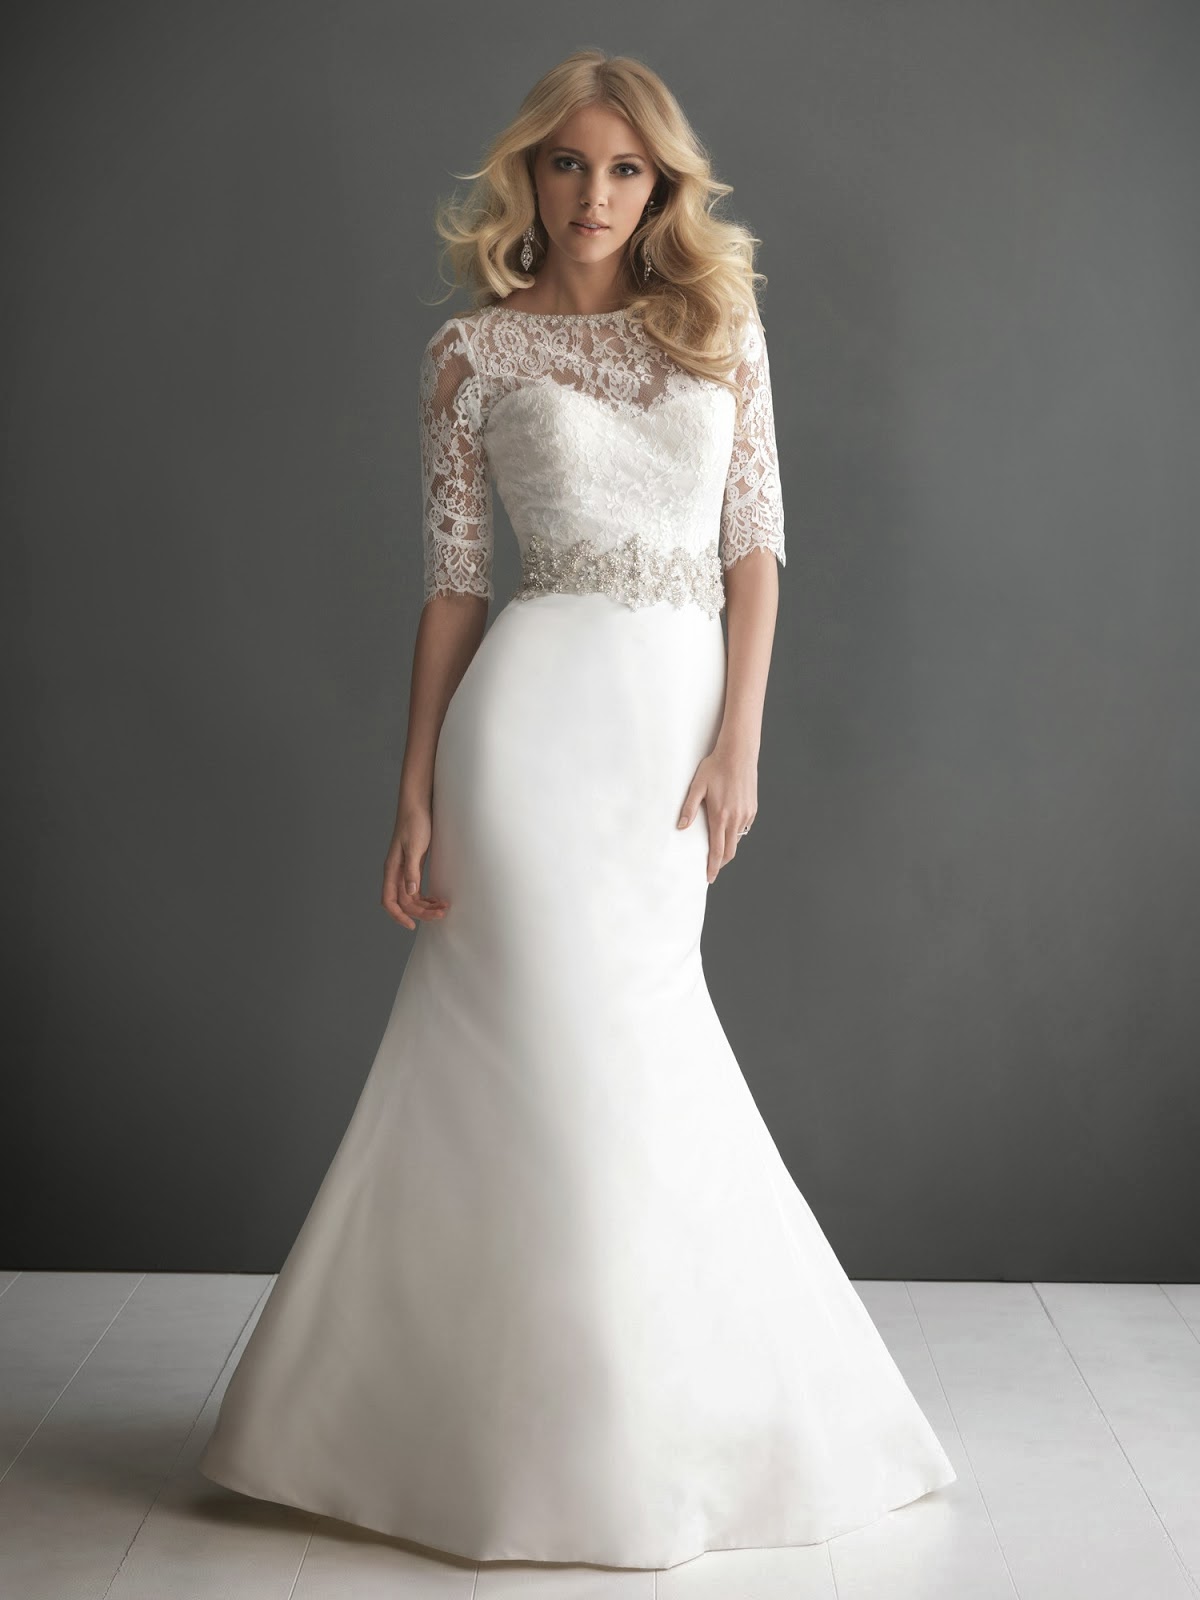 lace mermaid wedding dress with long sleeves Wedding dresses : Which would you rock on your big day?